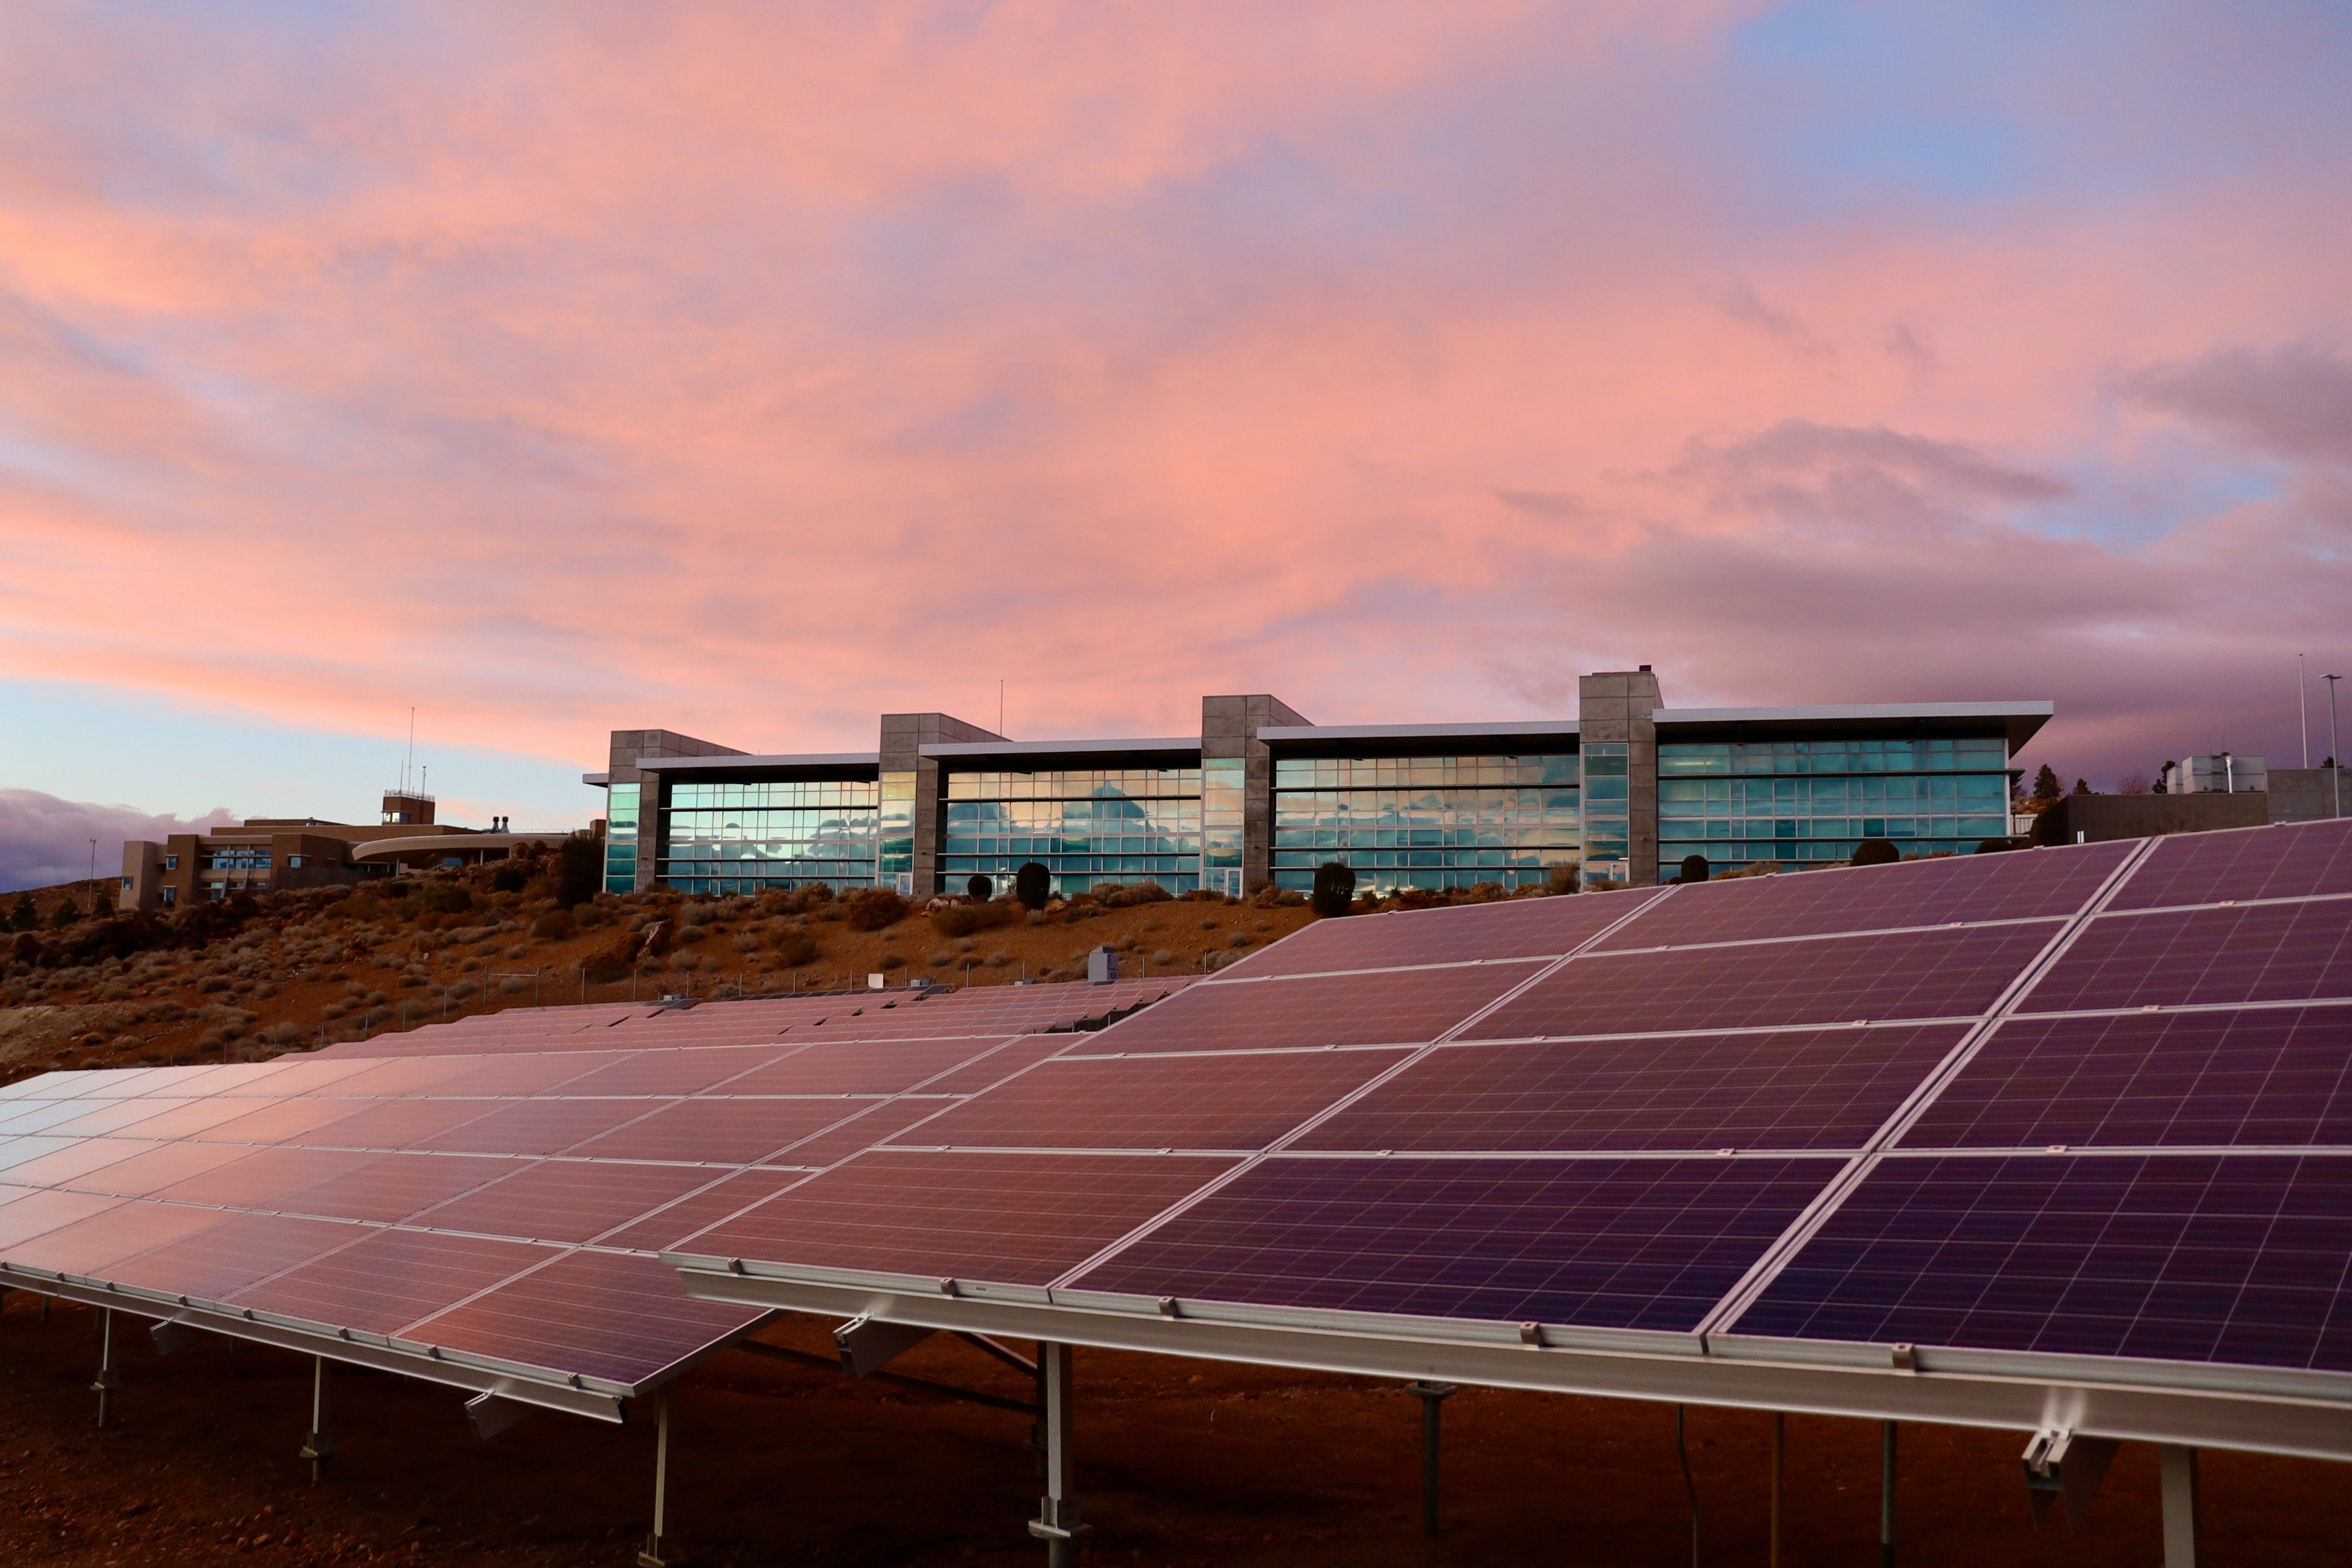 Ground mount solar panels in front of a large commercial building